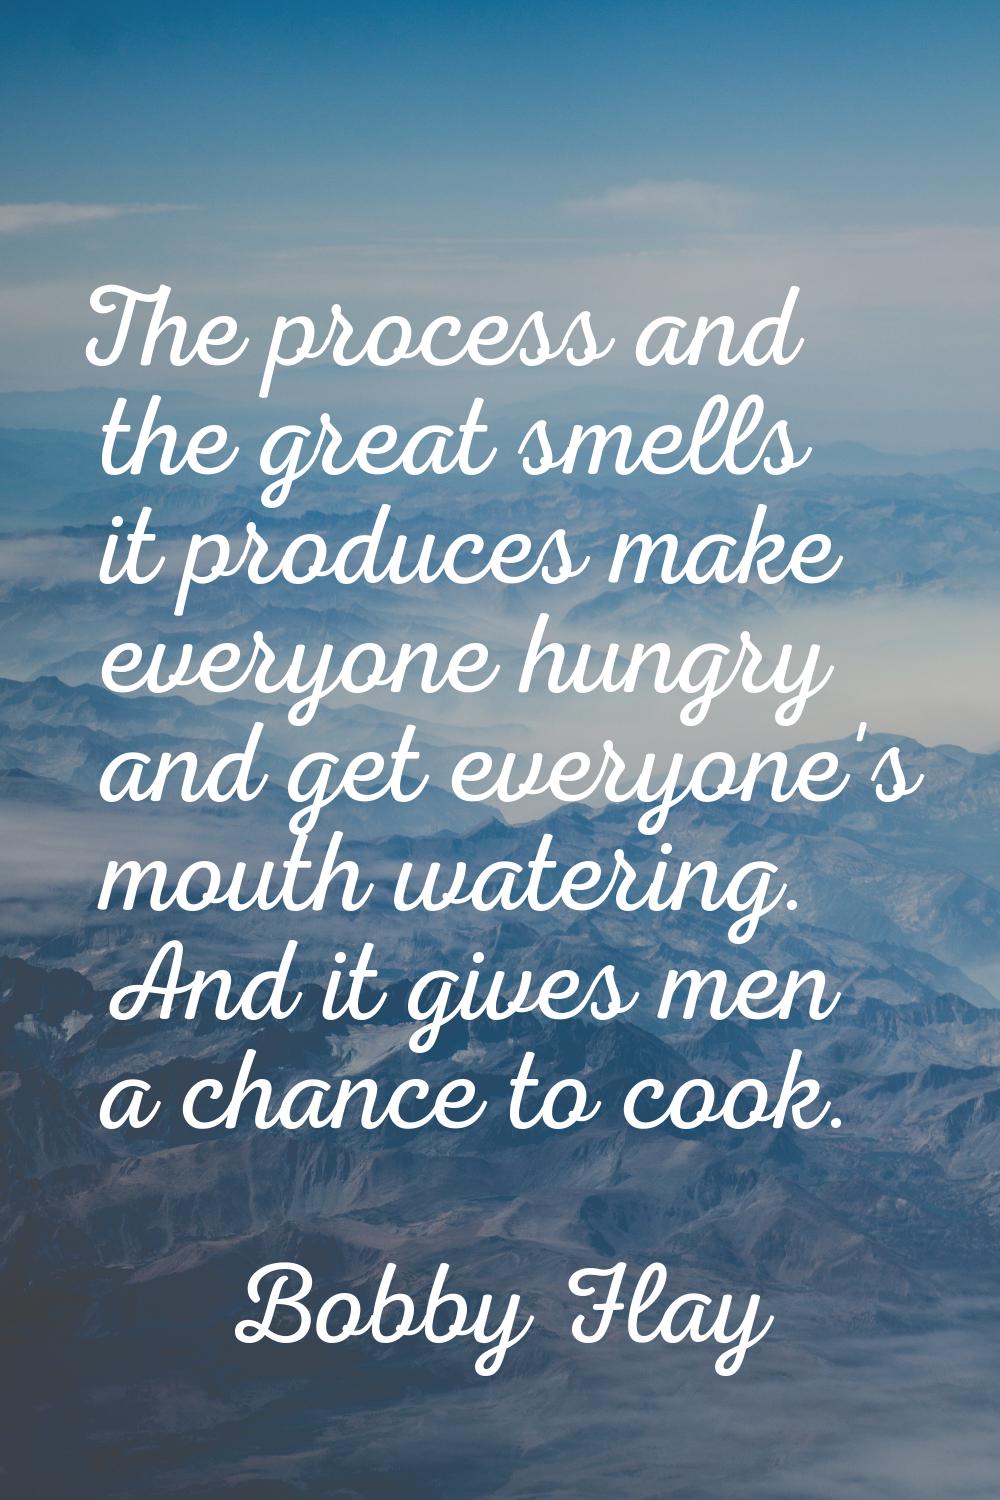 The process and the great smells it produces make everyone hungry and get everyone's mouth watering